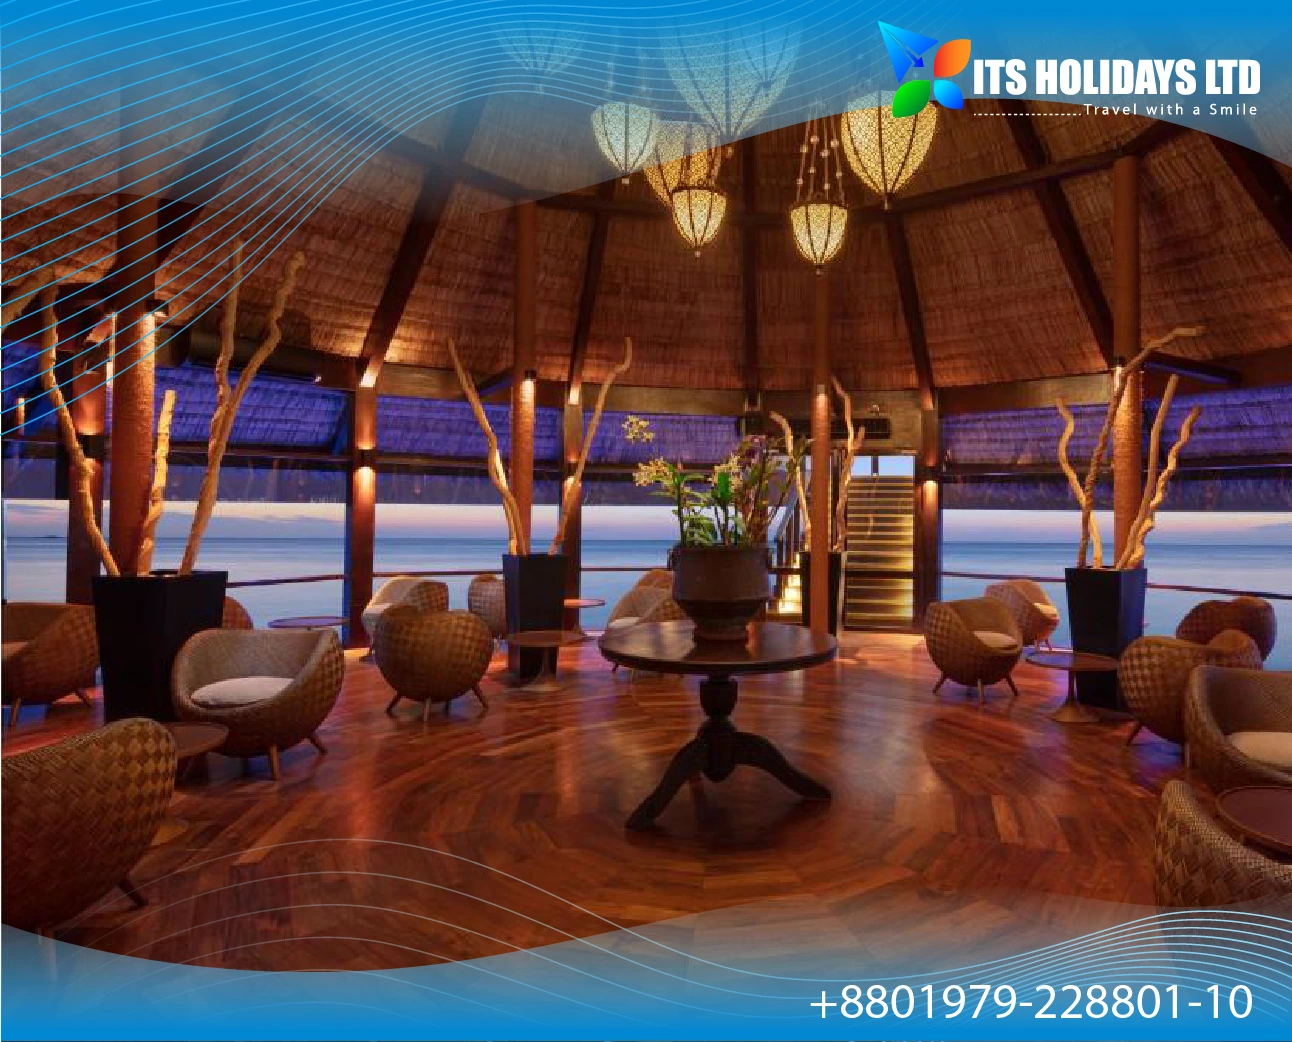 Romantic Maldives Tour Package from Bangladesh - 4